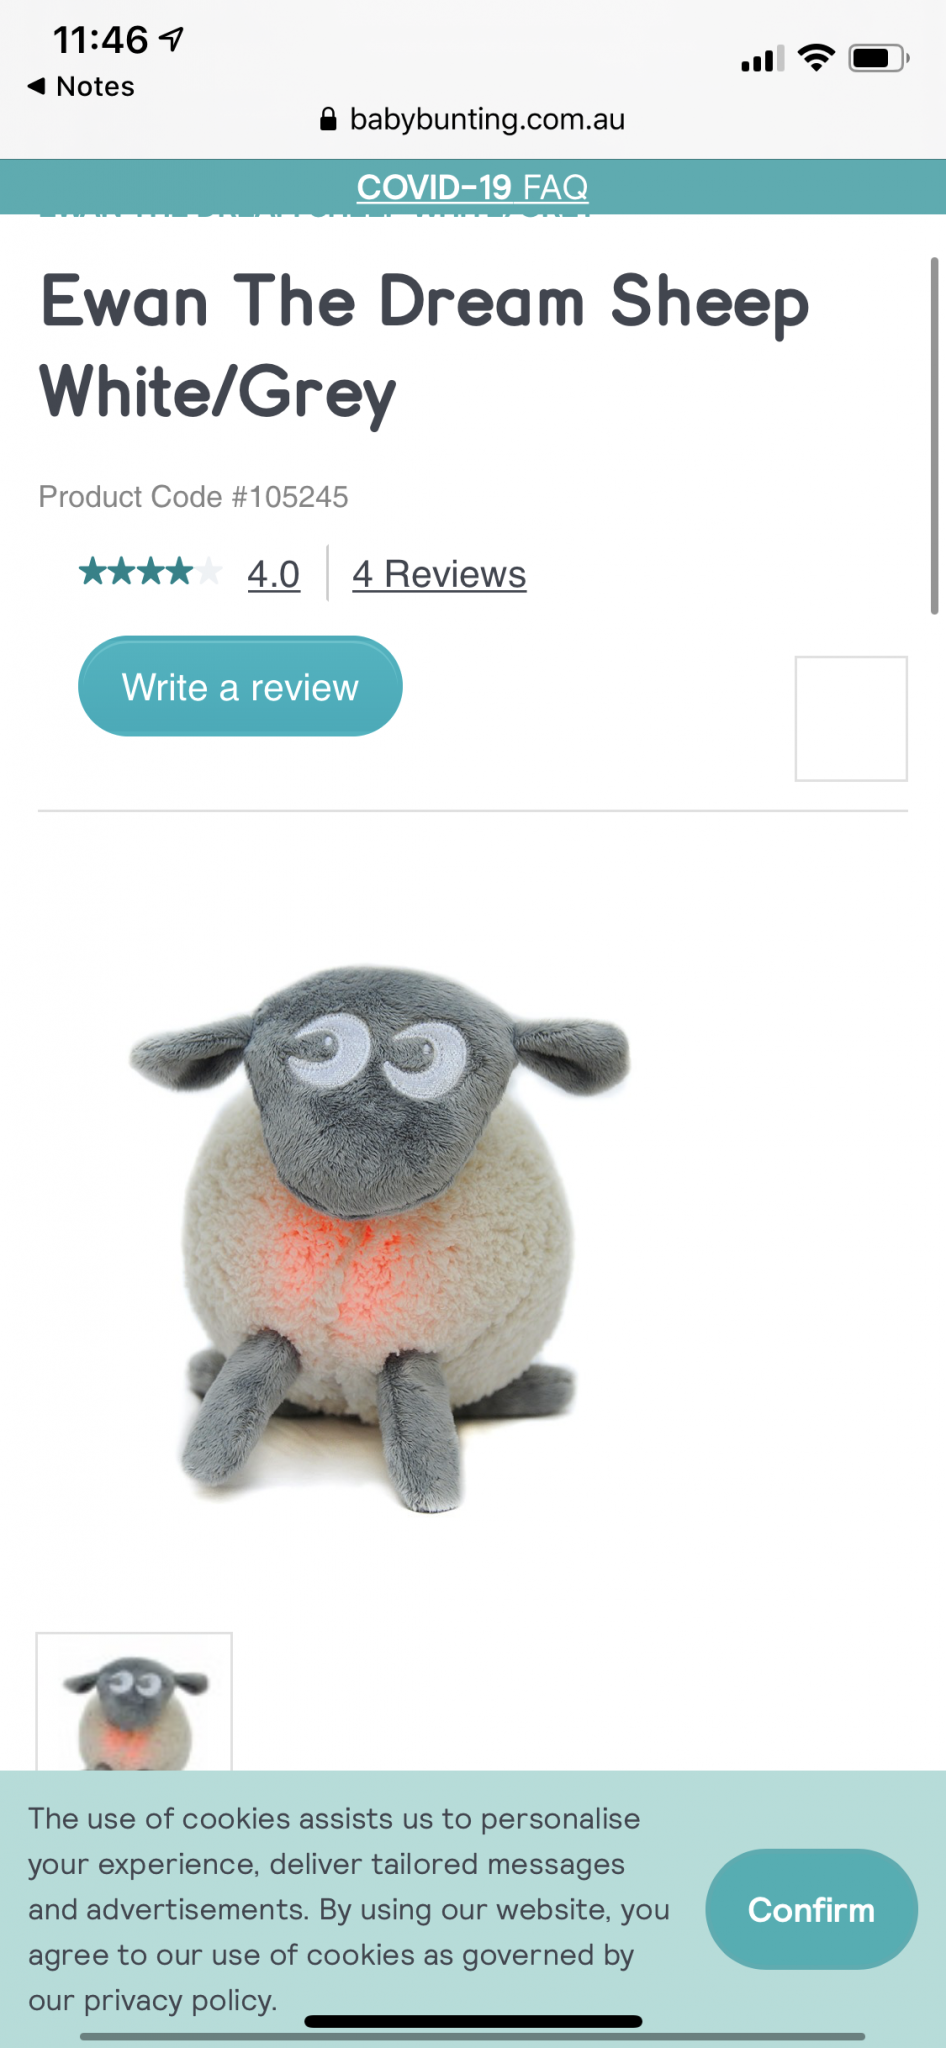 Cute toy with great reviews